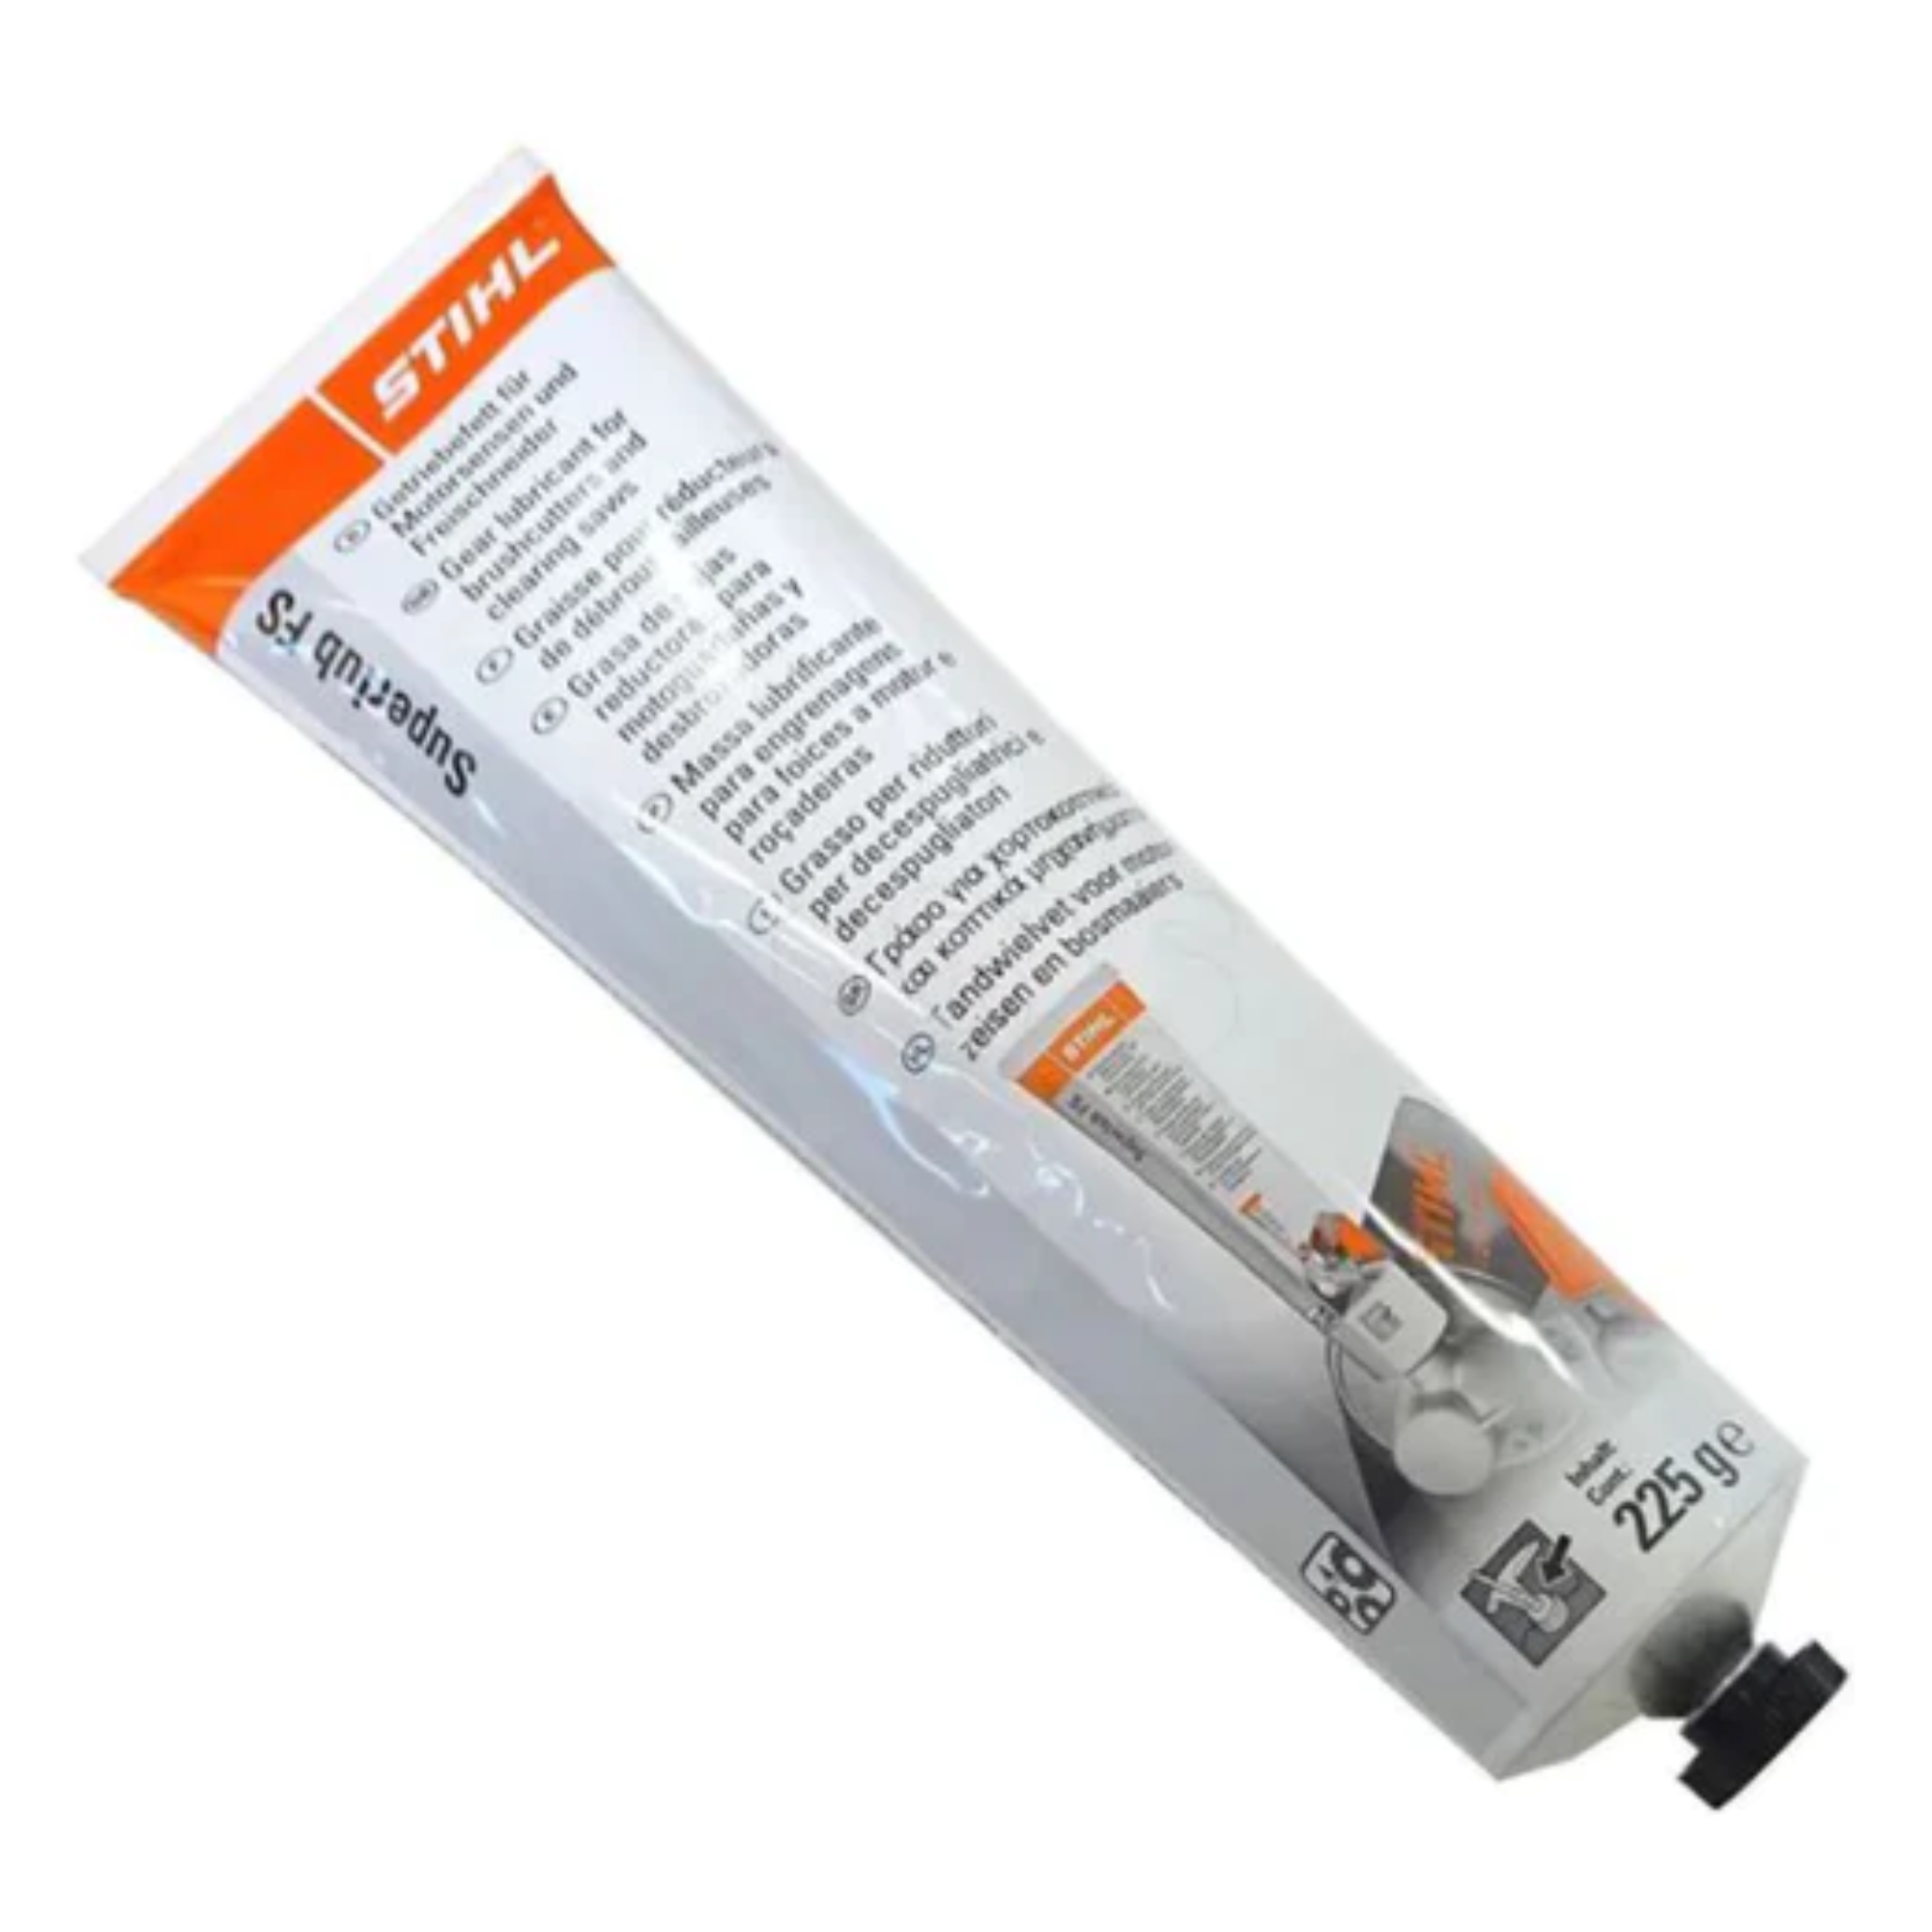 STIHL FS Gearbox Grease | 225gm | 0781 120 1118